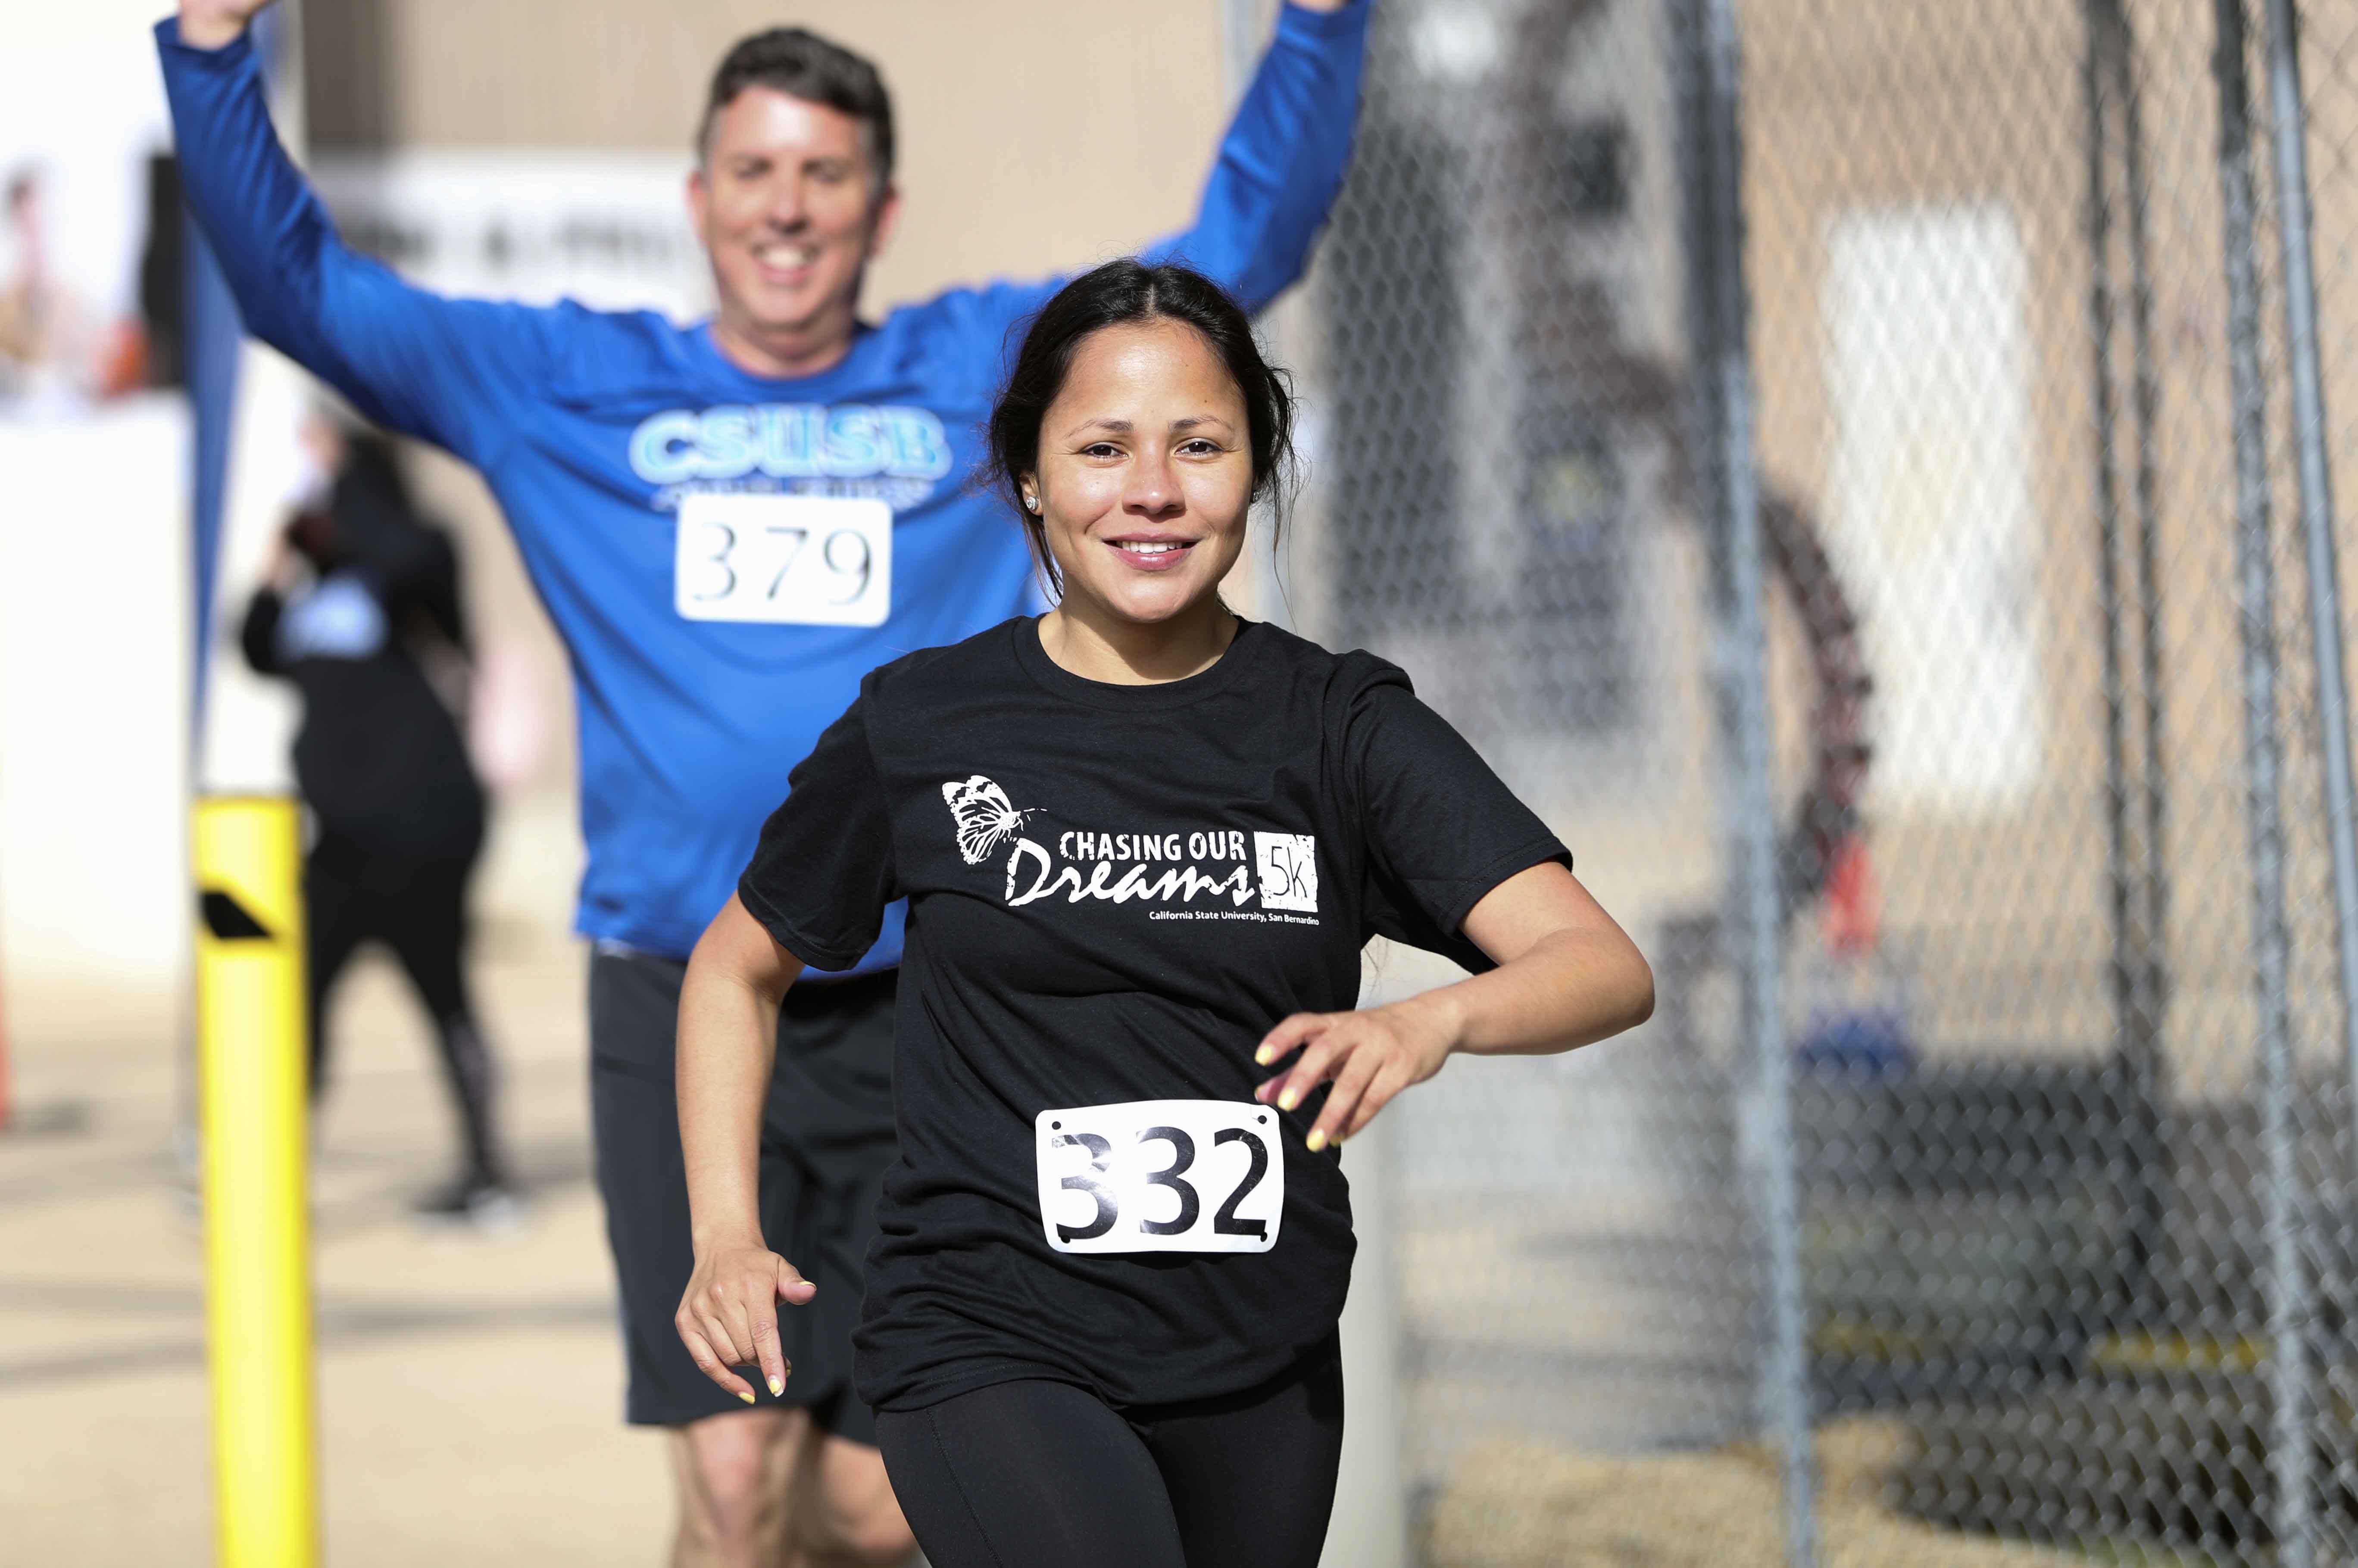 More than 110 people participated in the third annual Chasing our Dreams 5K Walk/Run 